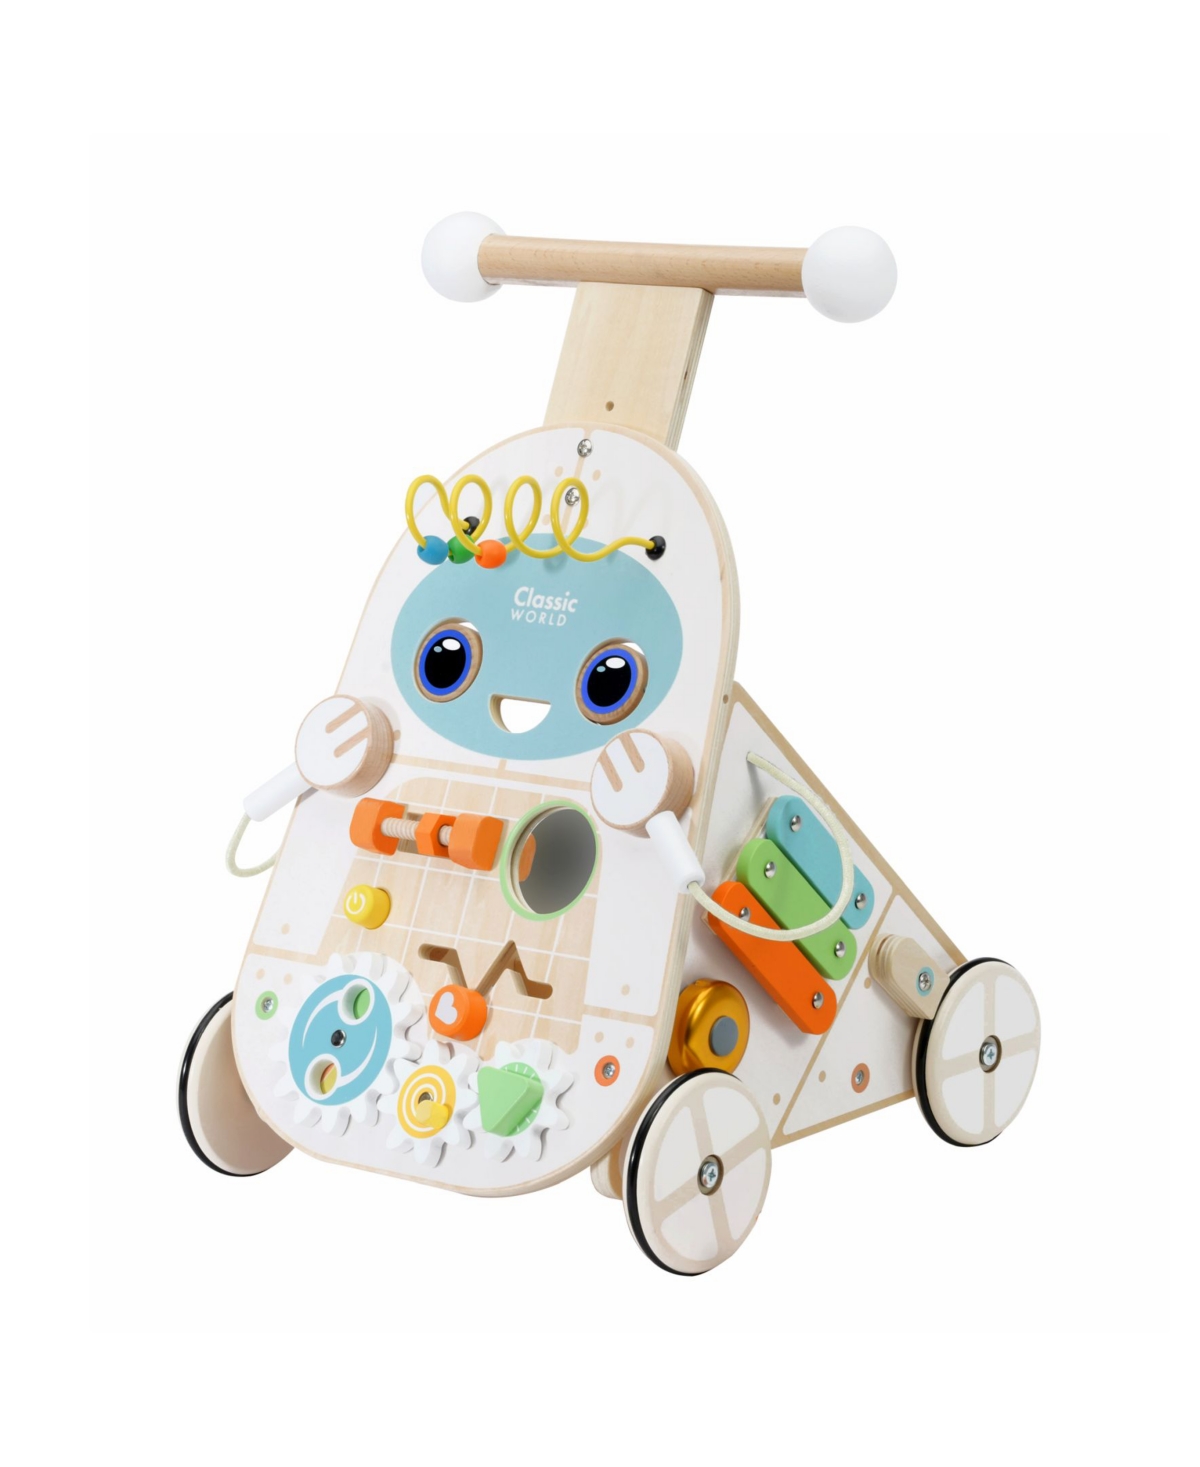 Classic Toy Babies' Learning Robot Walker, Set Of 6 In Multi